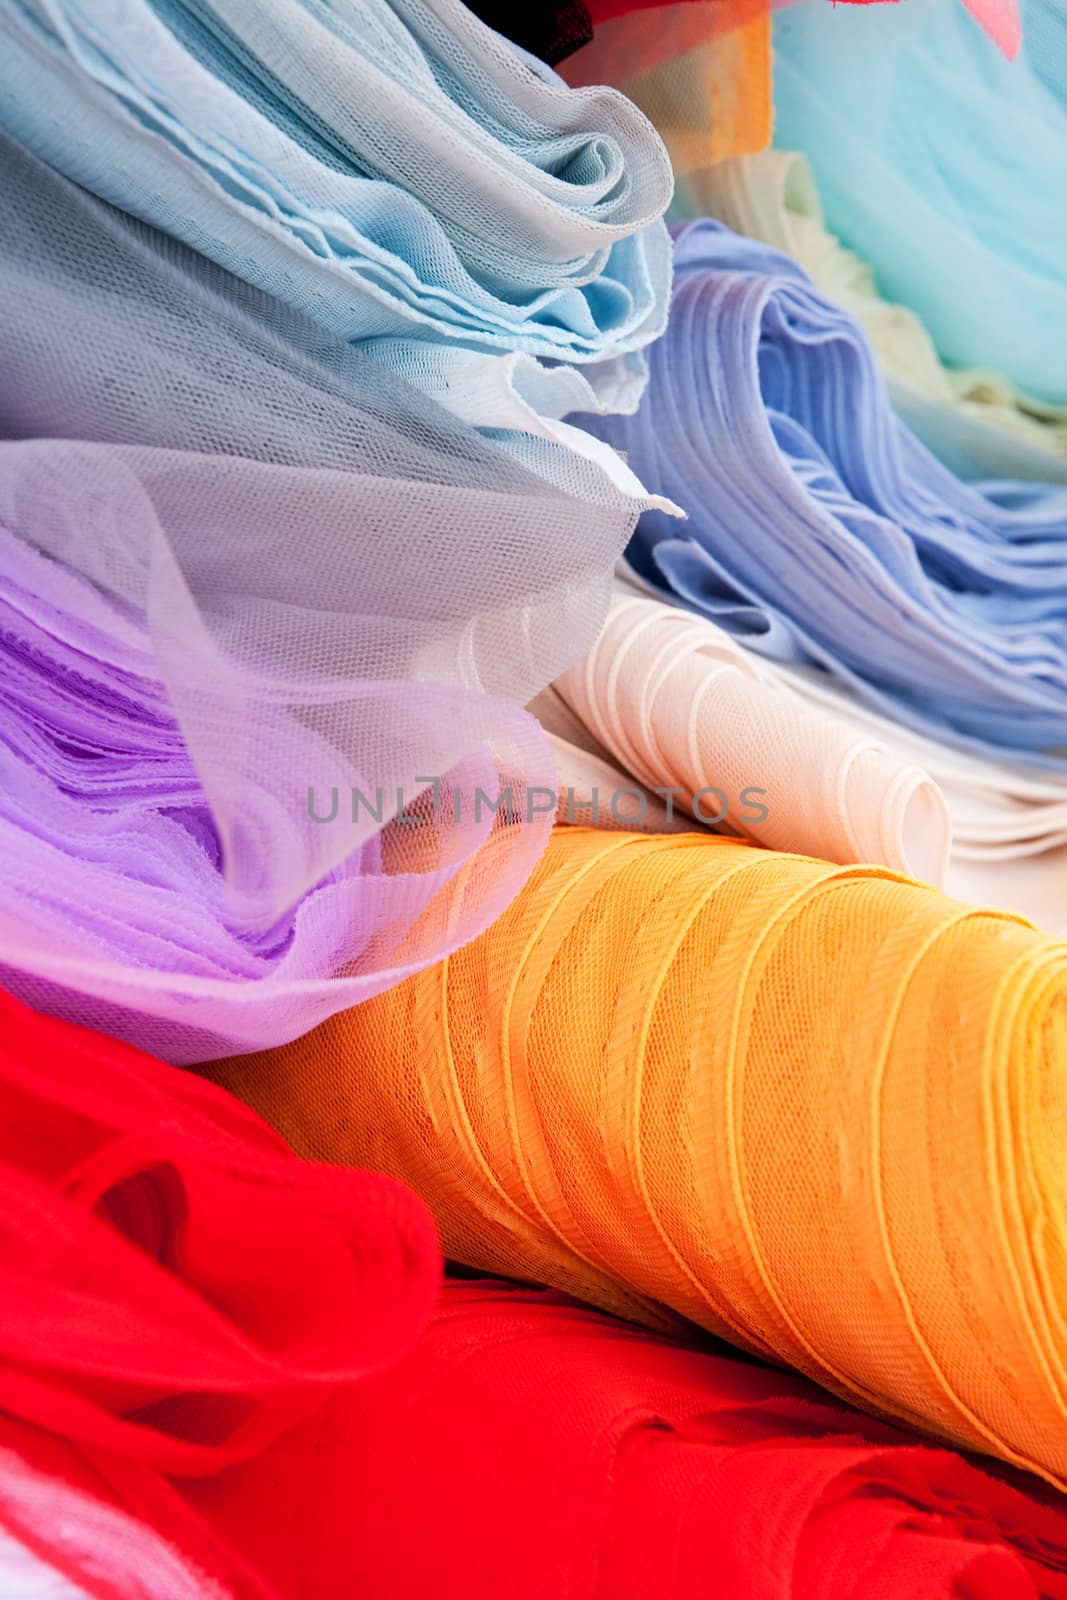 A background of various rolls of cloth